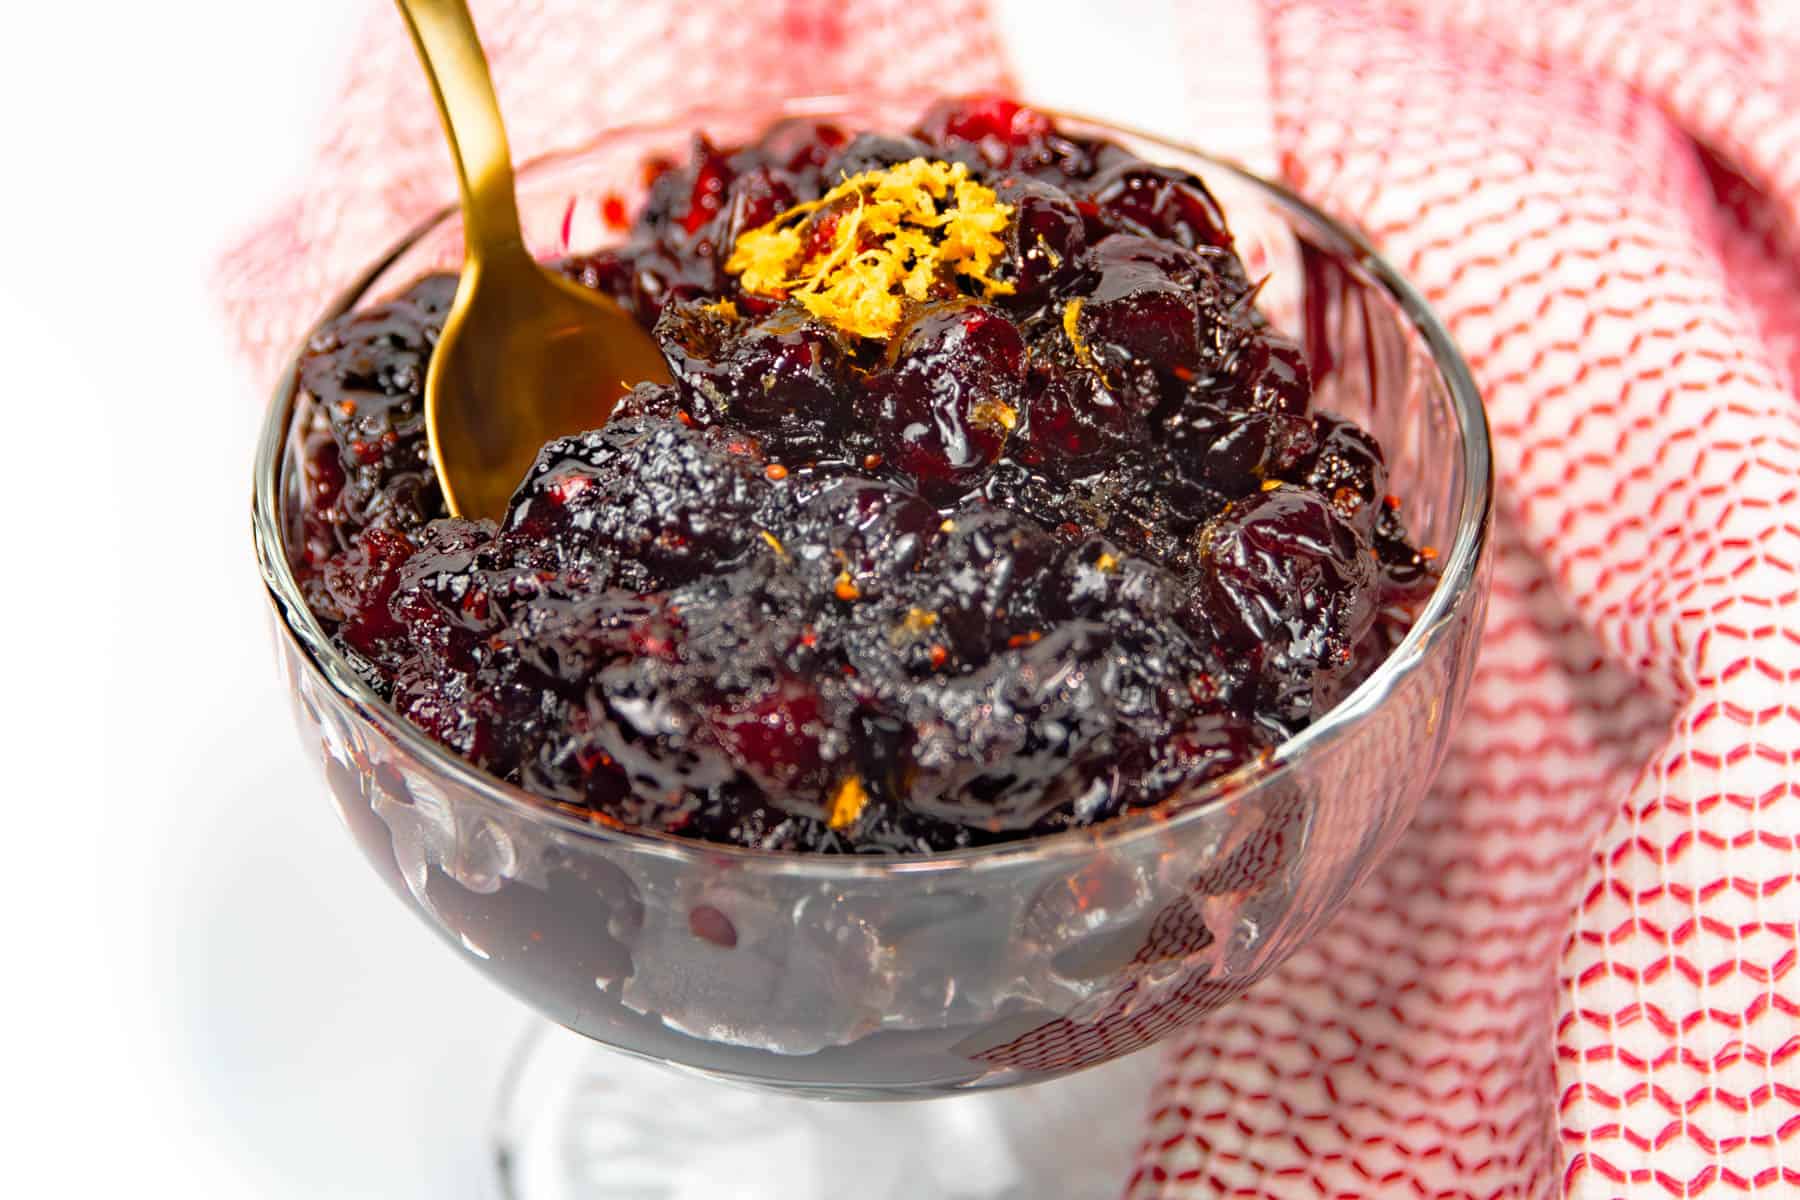 Cranberry sauce in a glass bowl with a spoon.